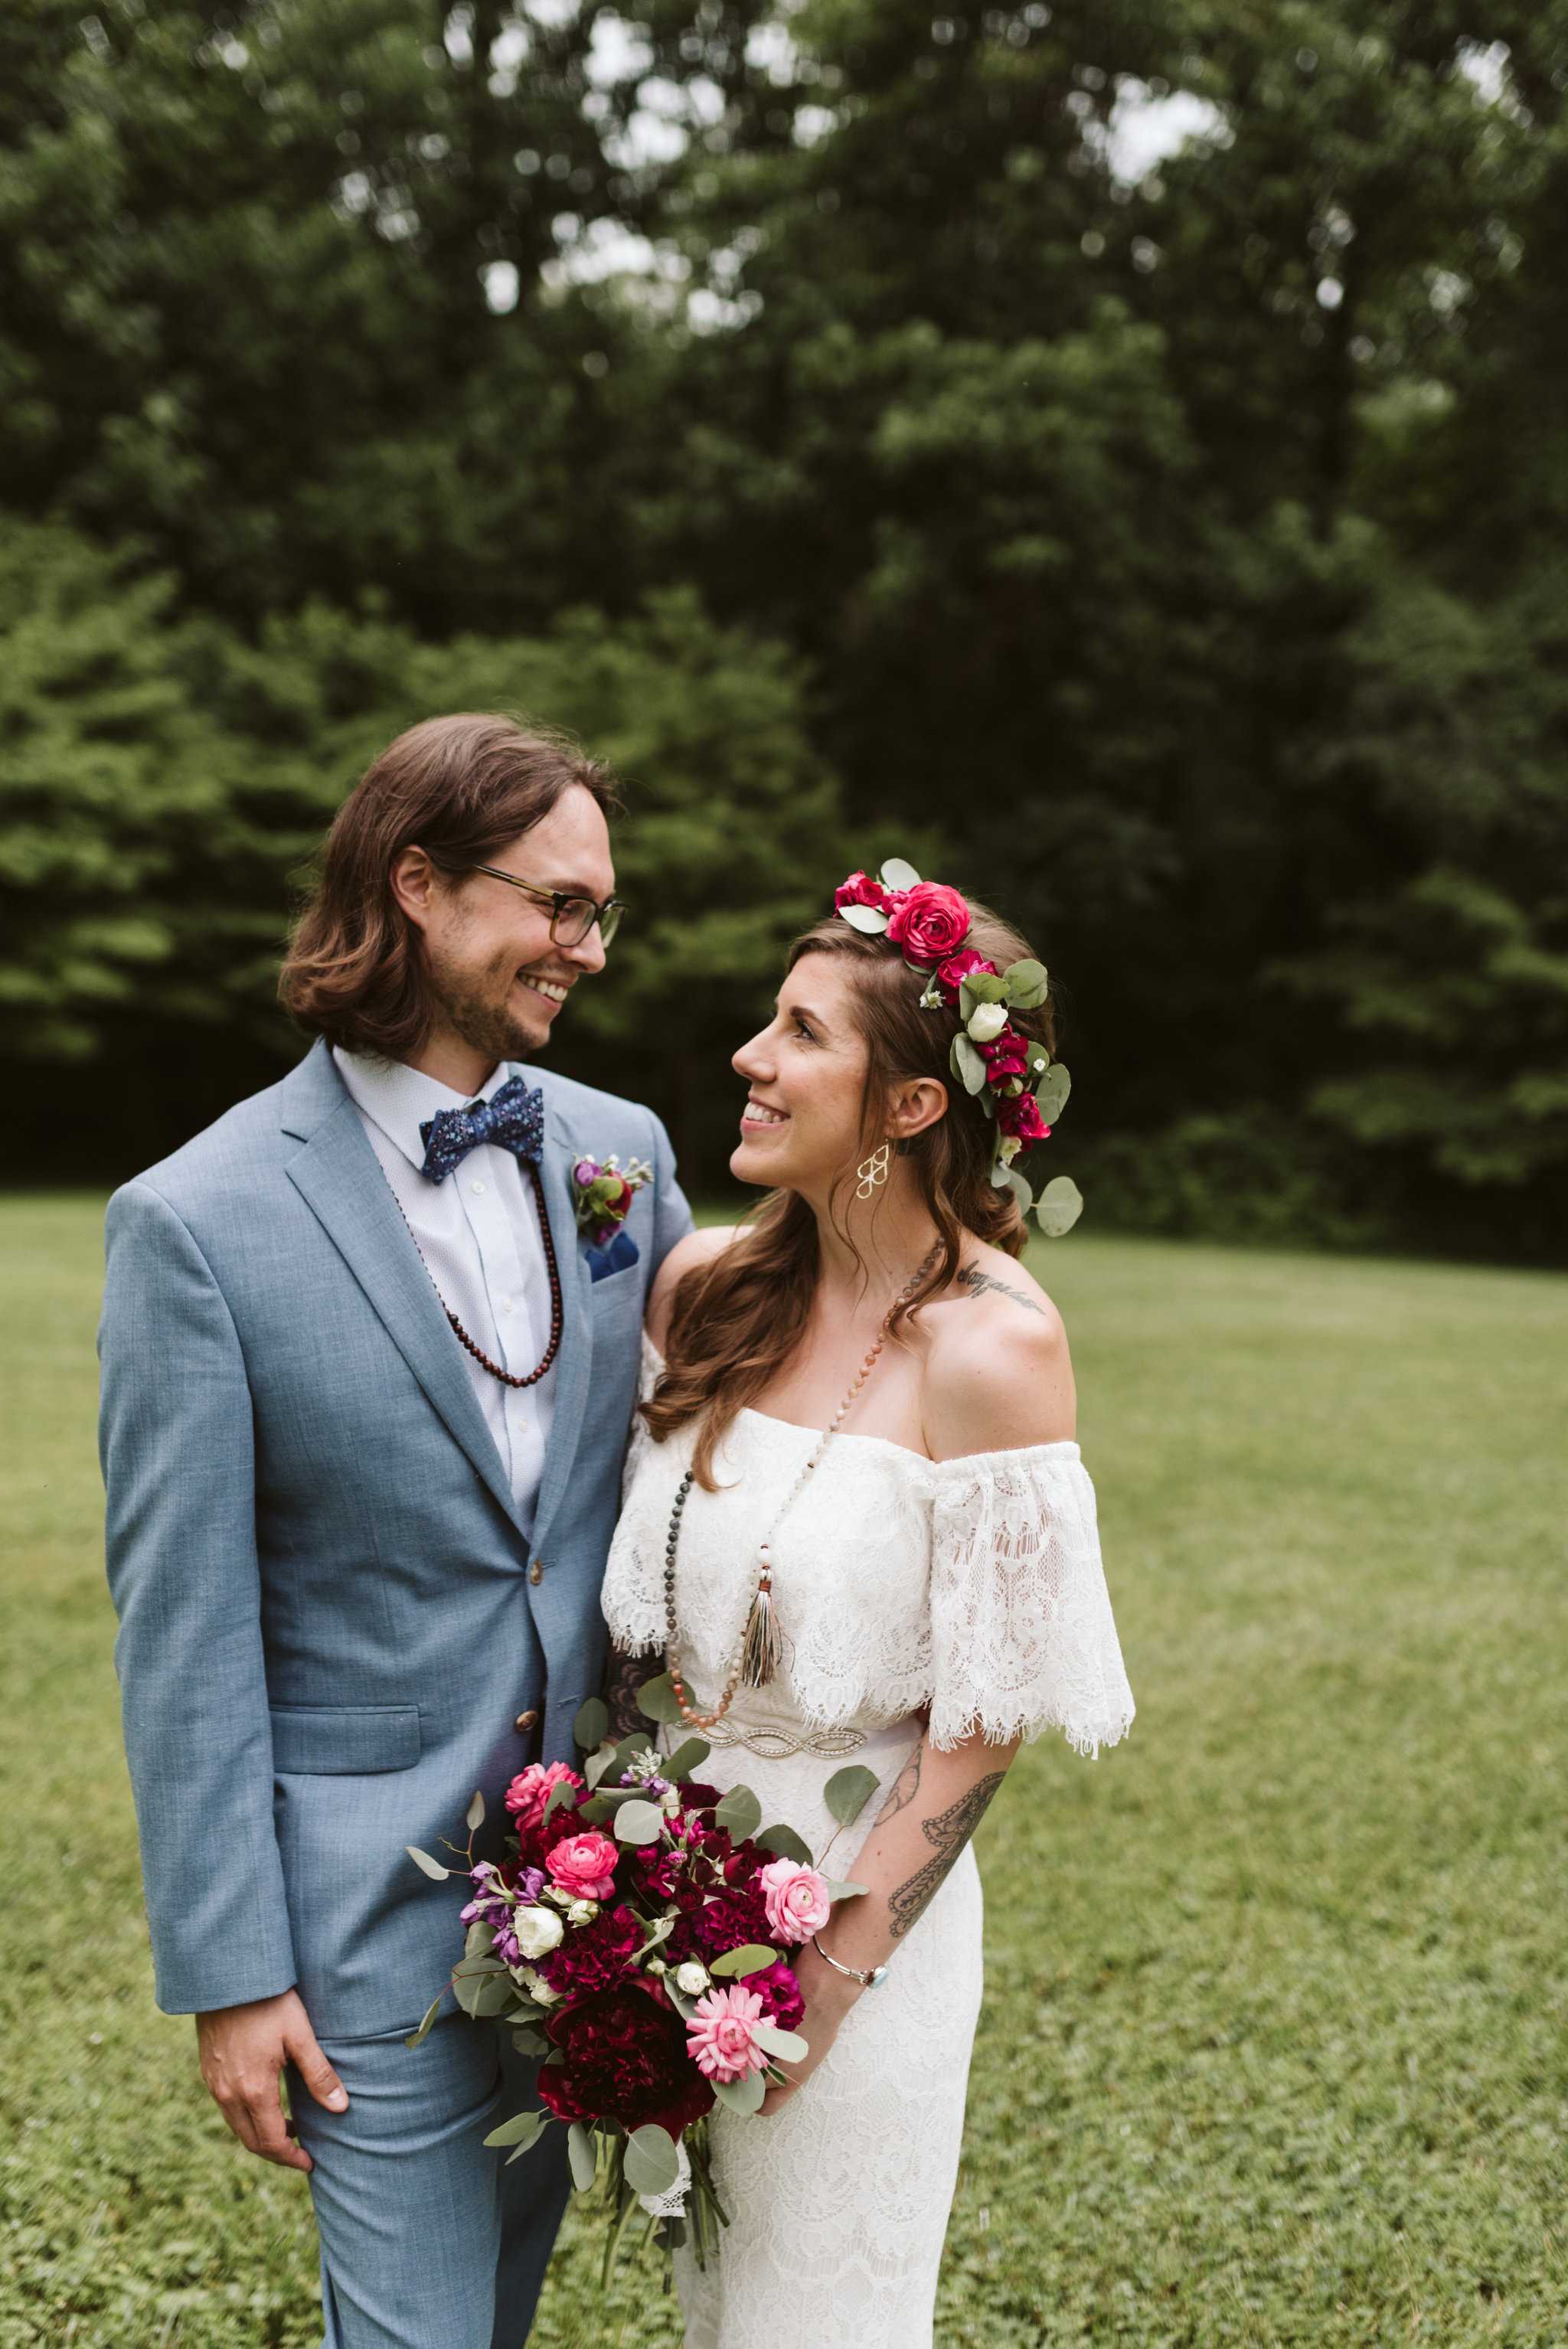  Annapolis, Quaker Wedding, Maryland Wedding Photographer, Intimate, Small Wedding, Vintage, DIY, Bride and Groom Smiling at Each Other, Outdoor Reception 